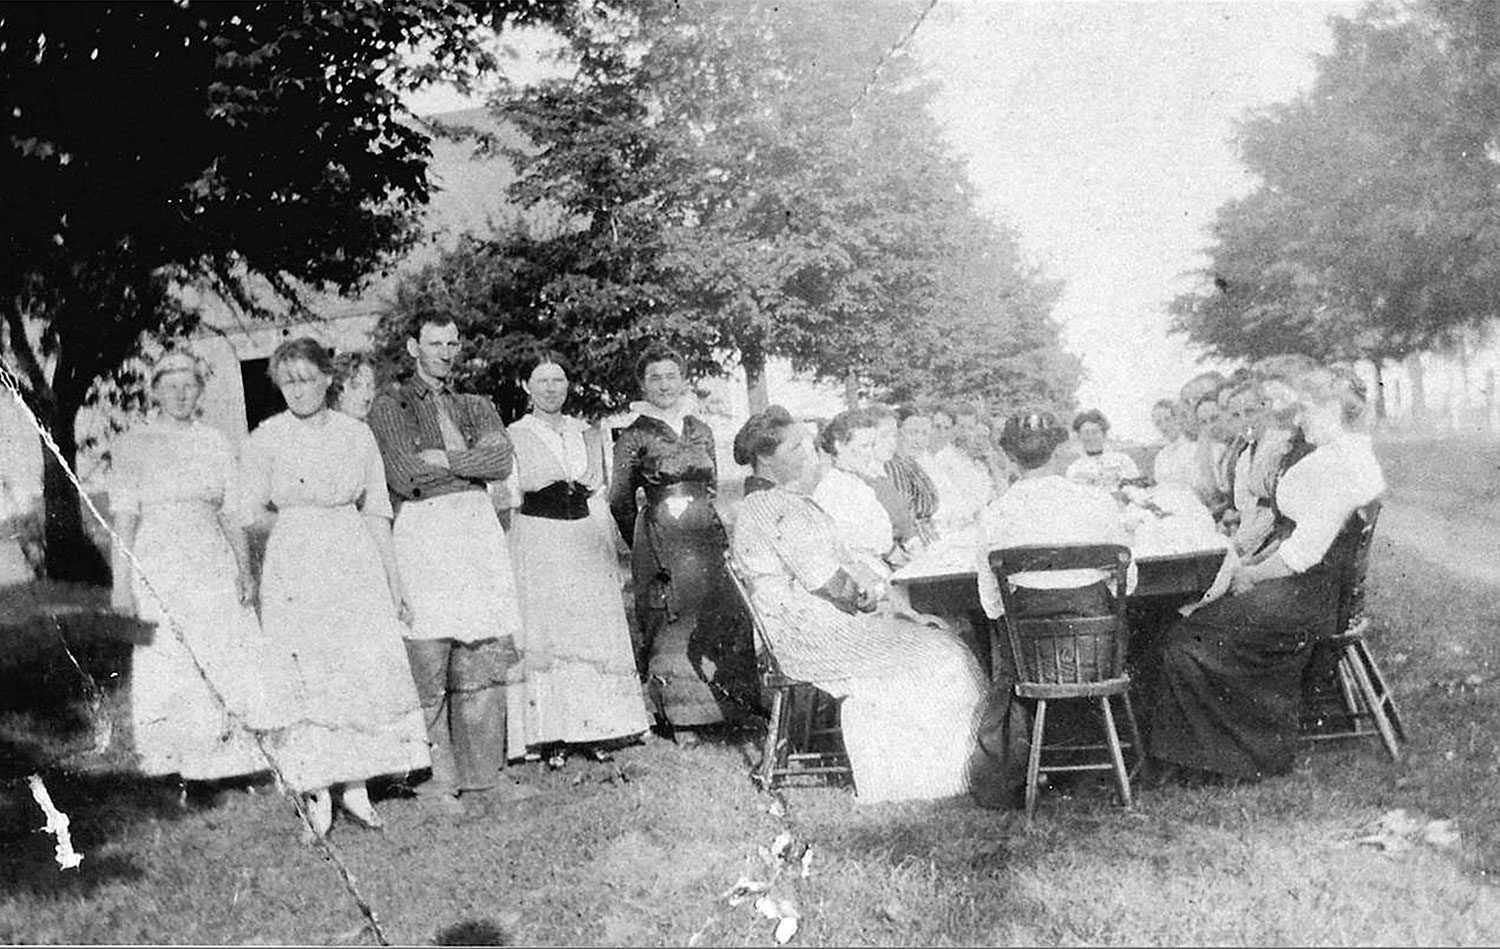 Feast after a quilting bee at Mrs. Burts, Erin Township, 1915. (Ph 10312, Wellington County Museum and Archives)